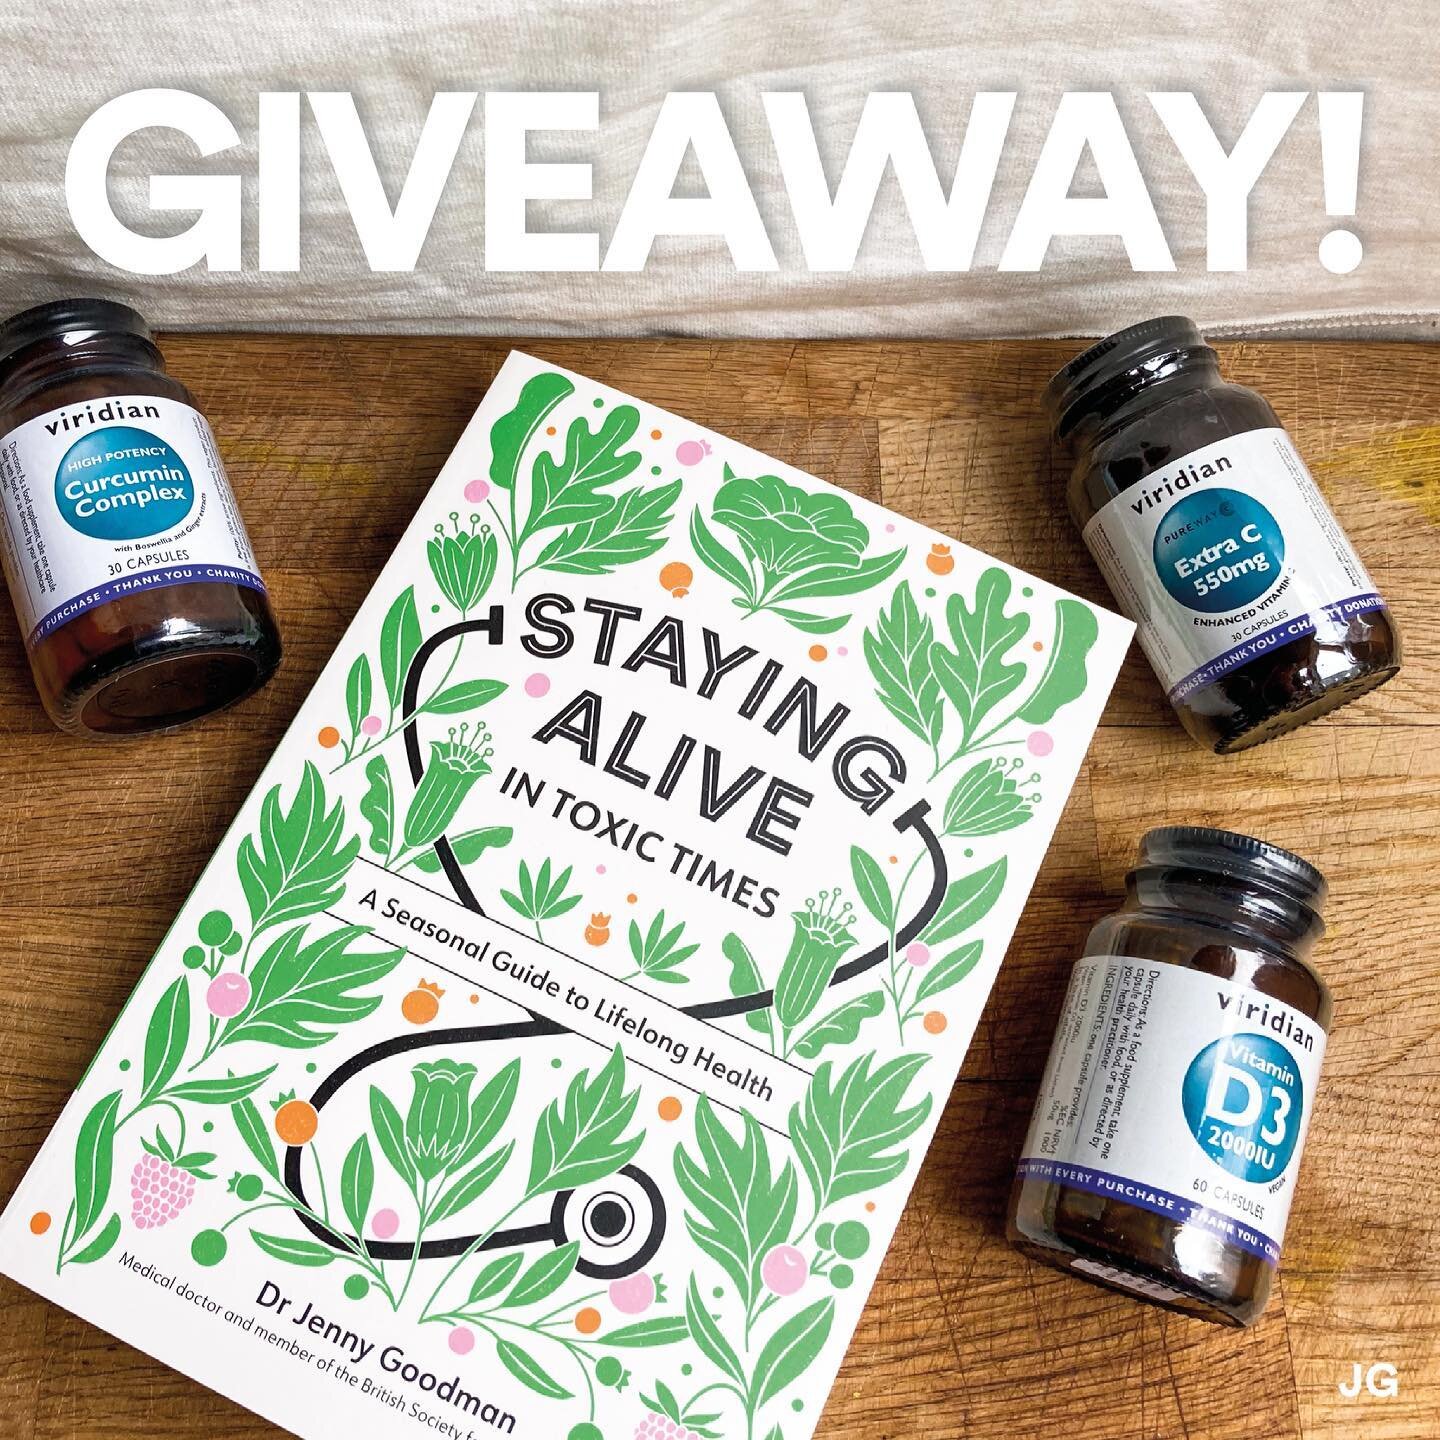 📖 **EXCITING NEWS** To celebrate the launch of my paperback I've teamed up with @viridannutrition to offer a Instagram giveaway of three of my favourite supplements AND a brand new paperback copy (released today!) of #StayingAliveinToxicTimes. 

The